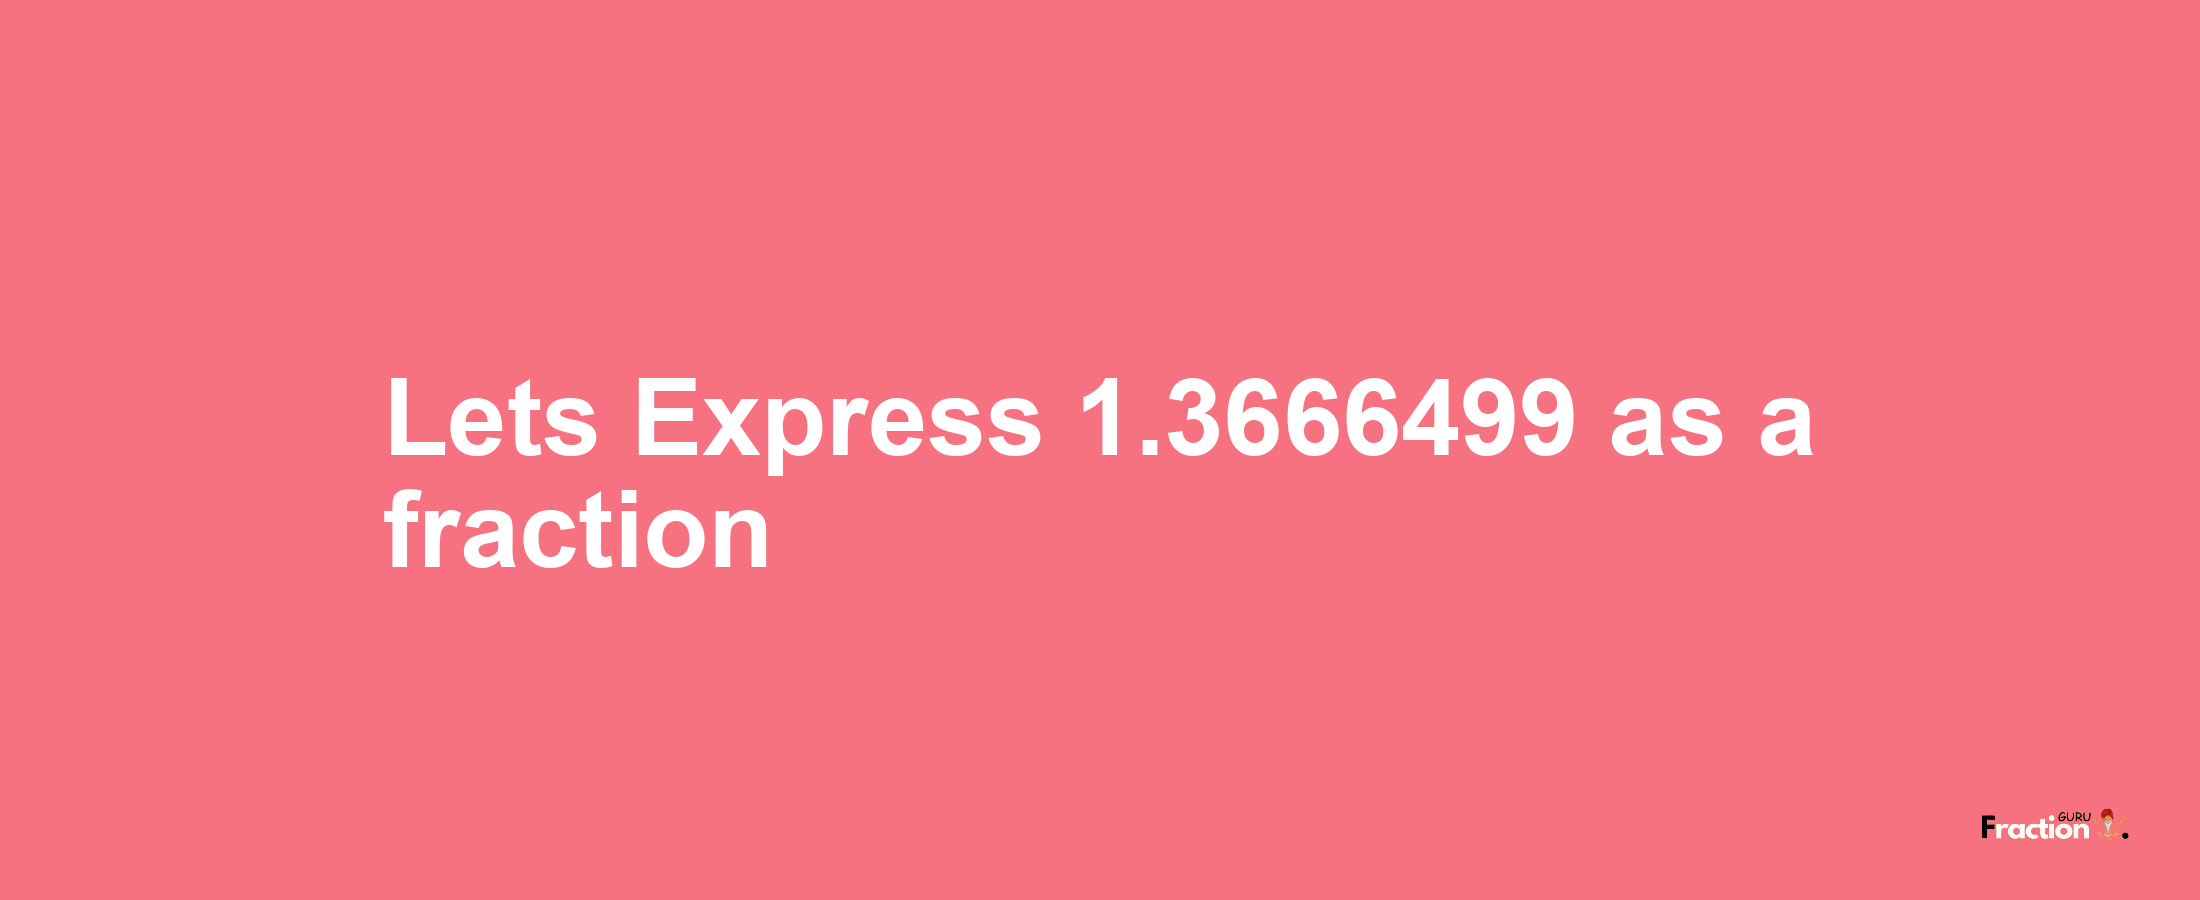 Lets Express 1.3666499 as afraction